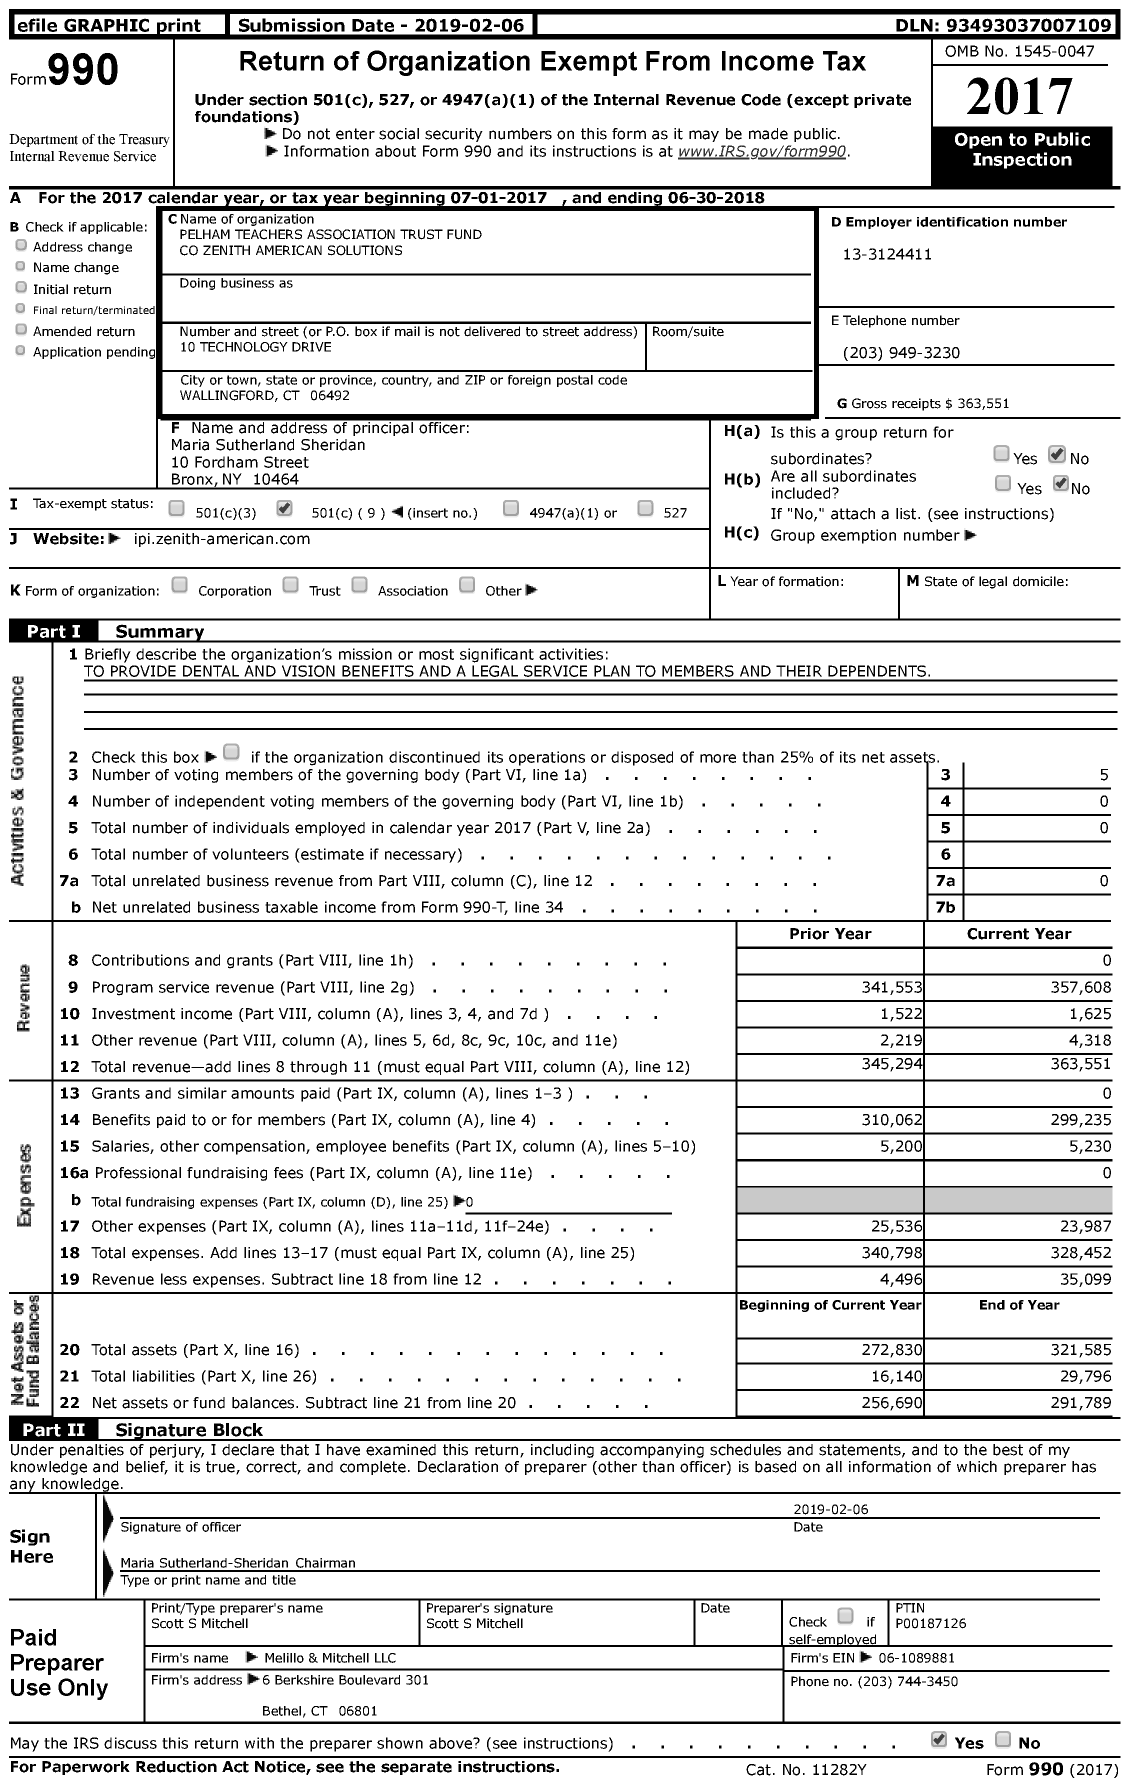 Image of first page of 2017 Form 990 for Pelham Teachers Association Trust Fund